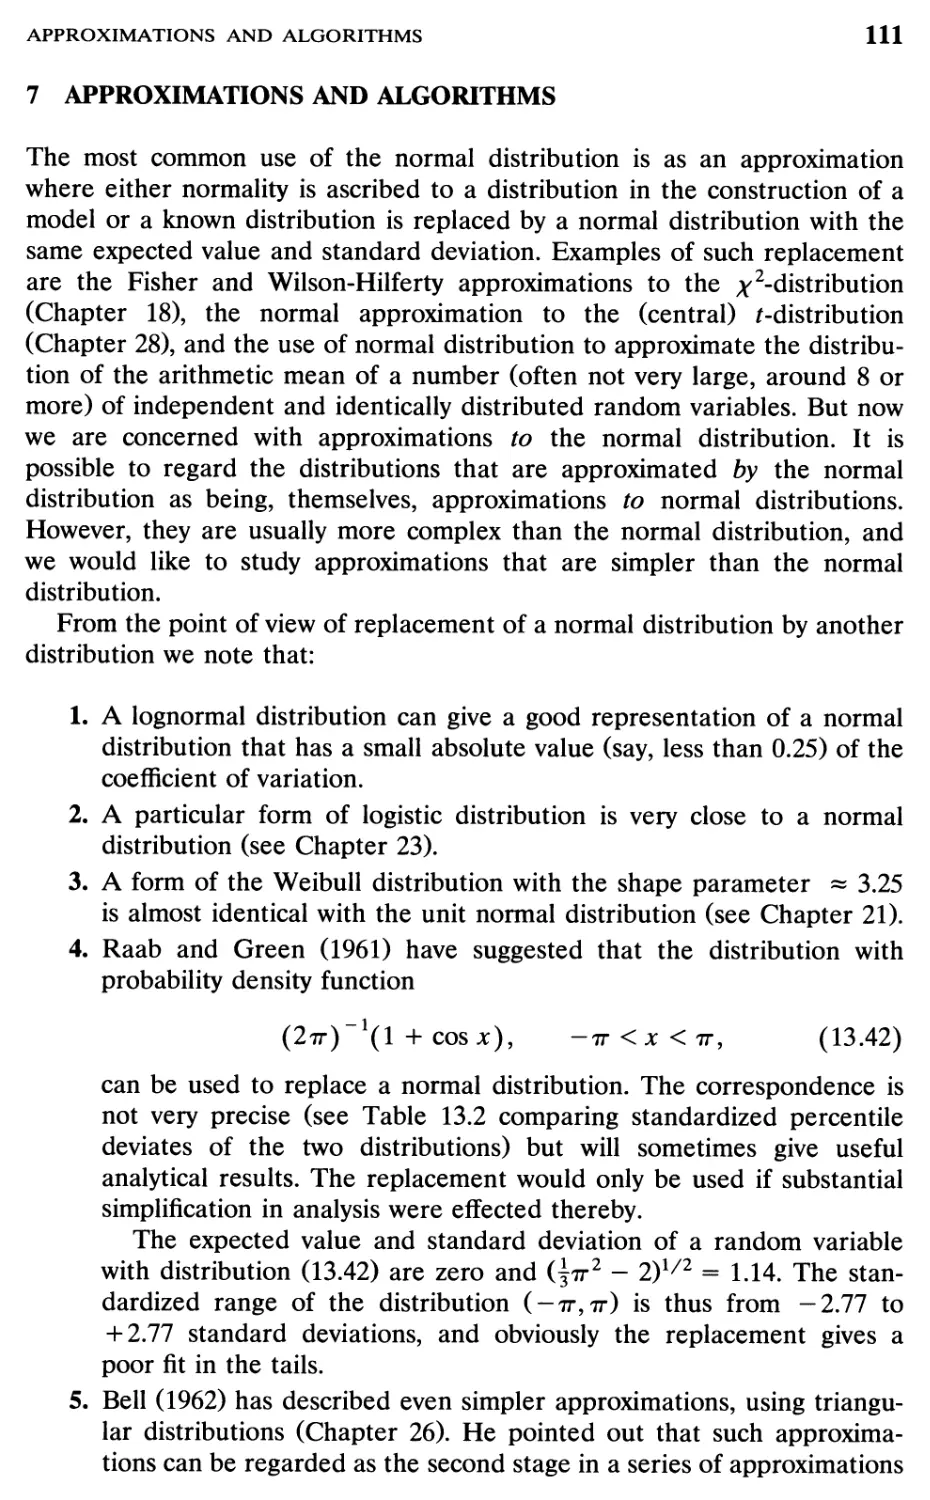 7 Approximations and Algorithms, 111